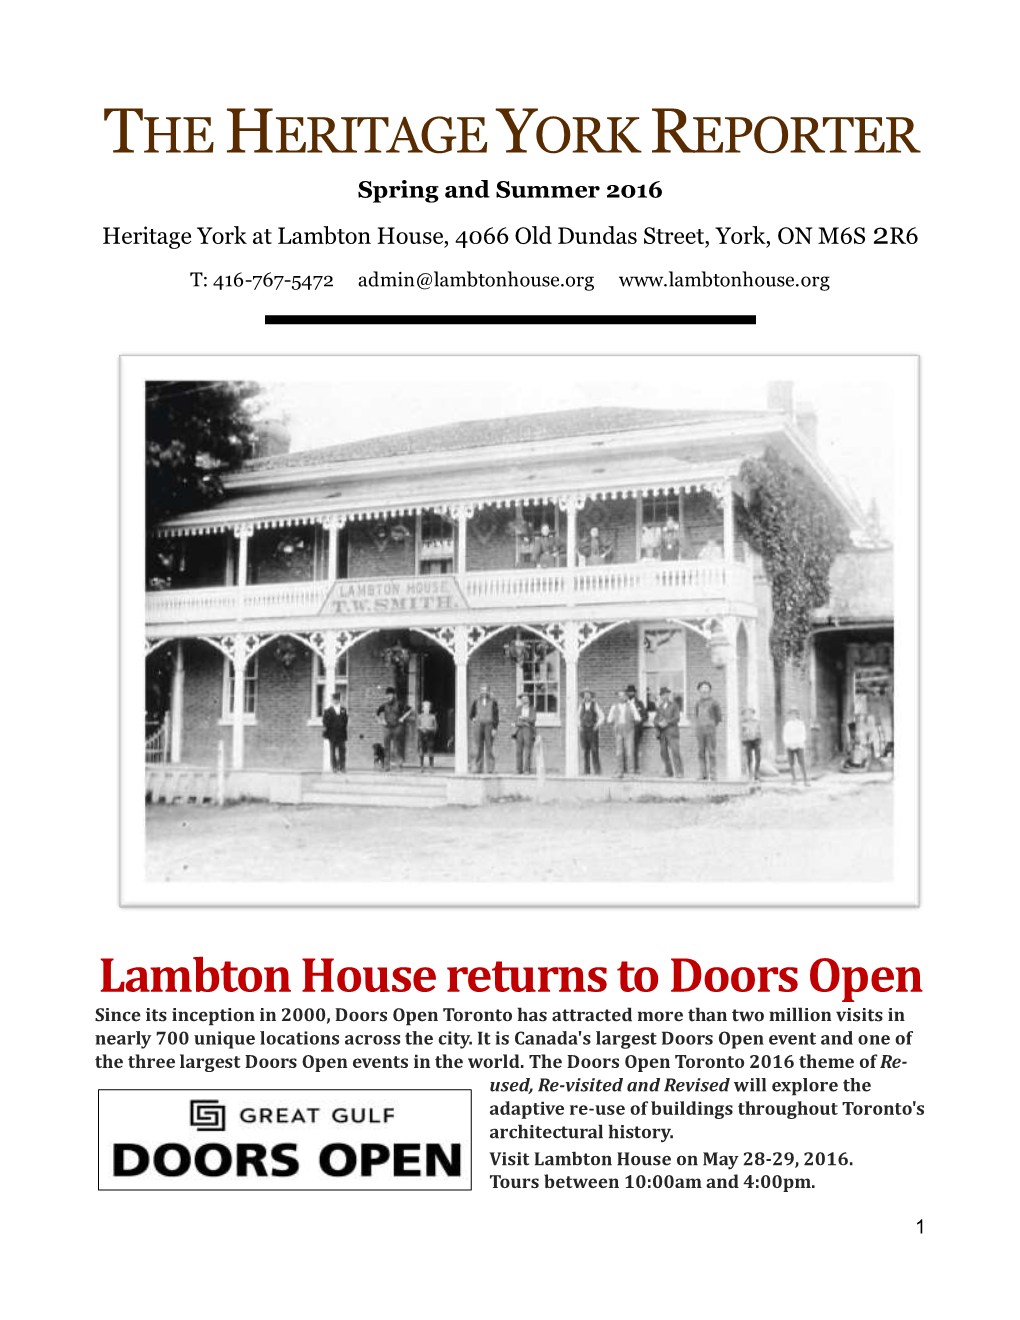 THE HERITAGE YORK REPORTER Spring and Summer 2016 Heritage York at Lambton House, 4066 Old Dundas Street, York, on M6S 2R6